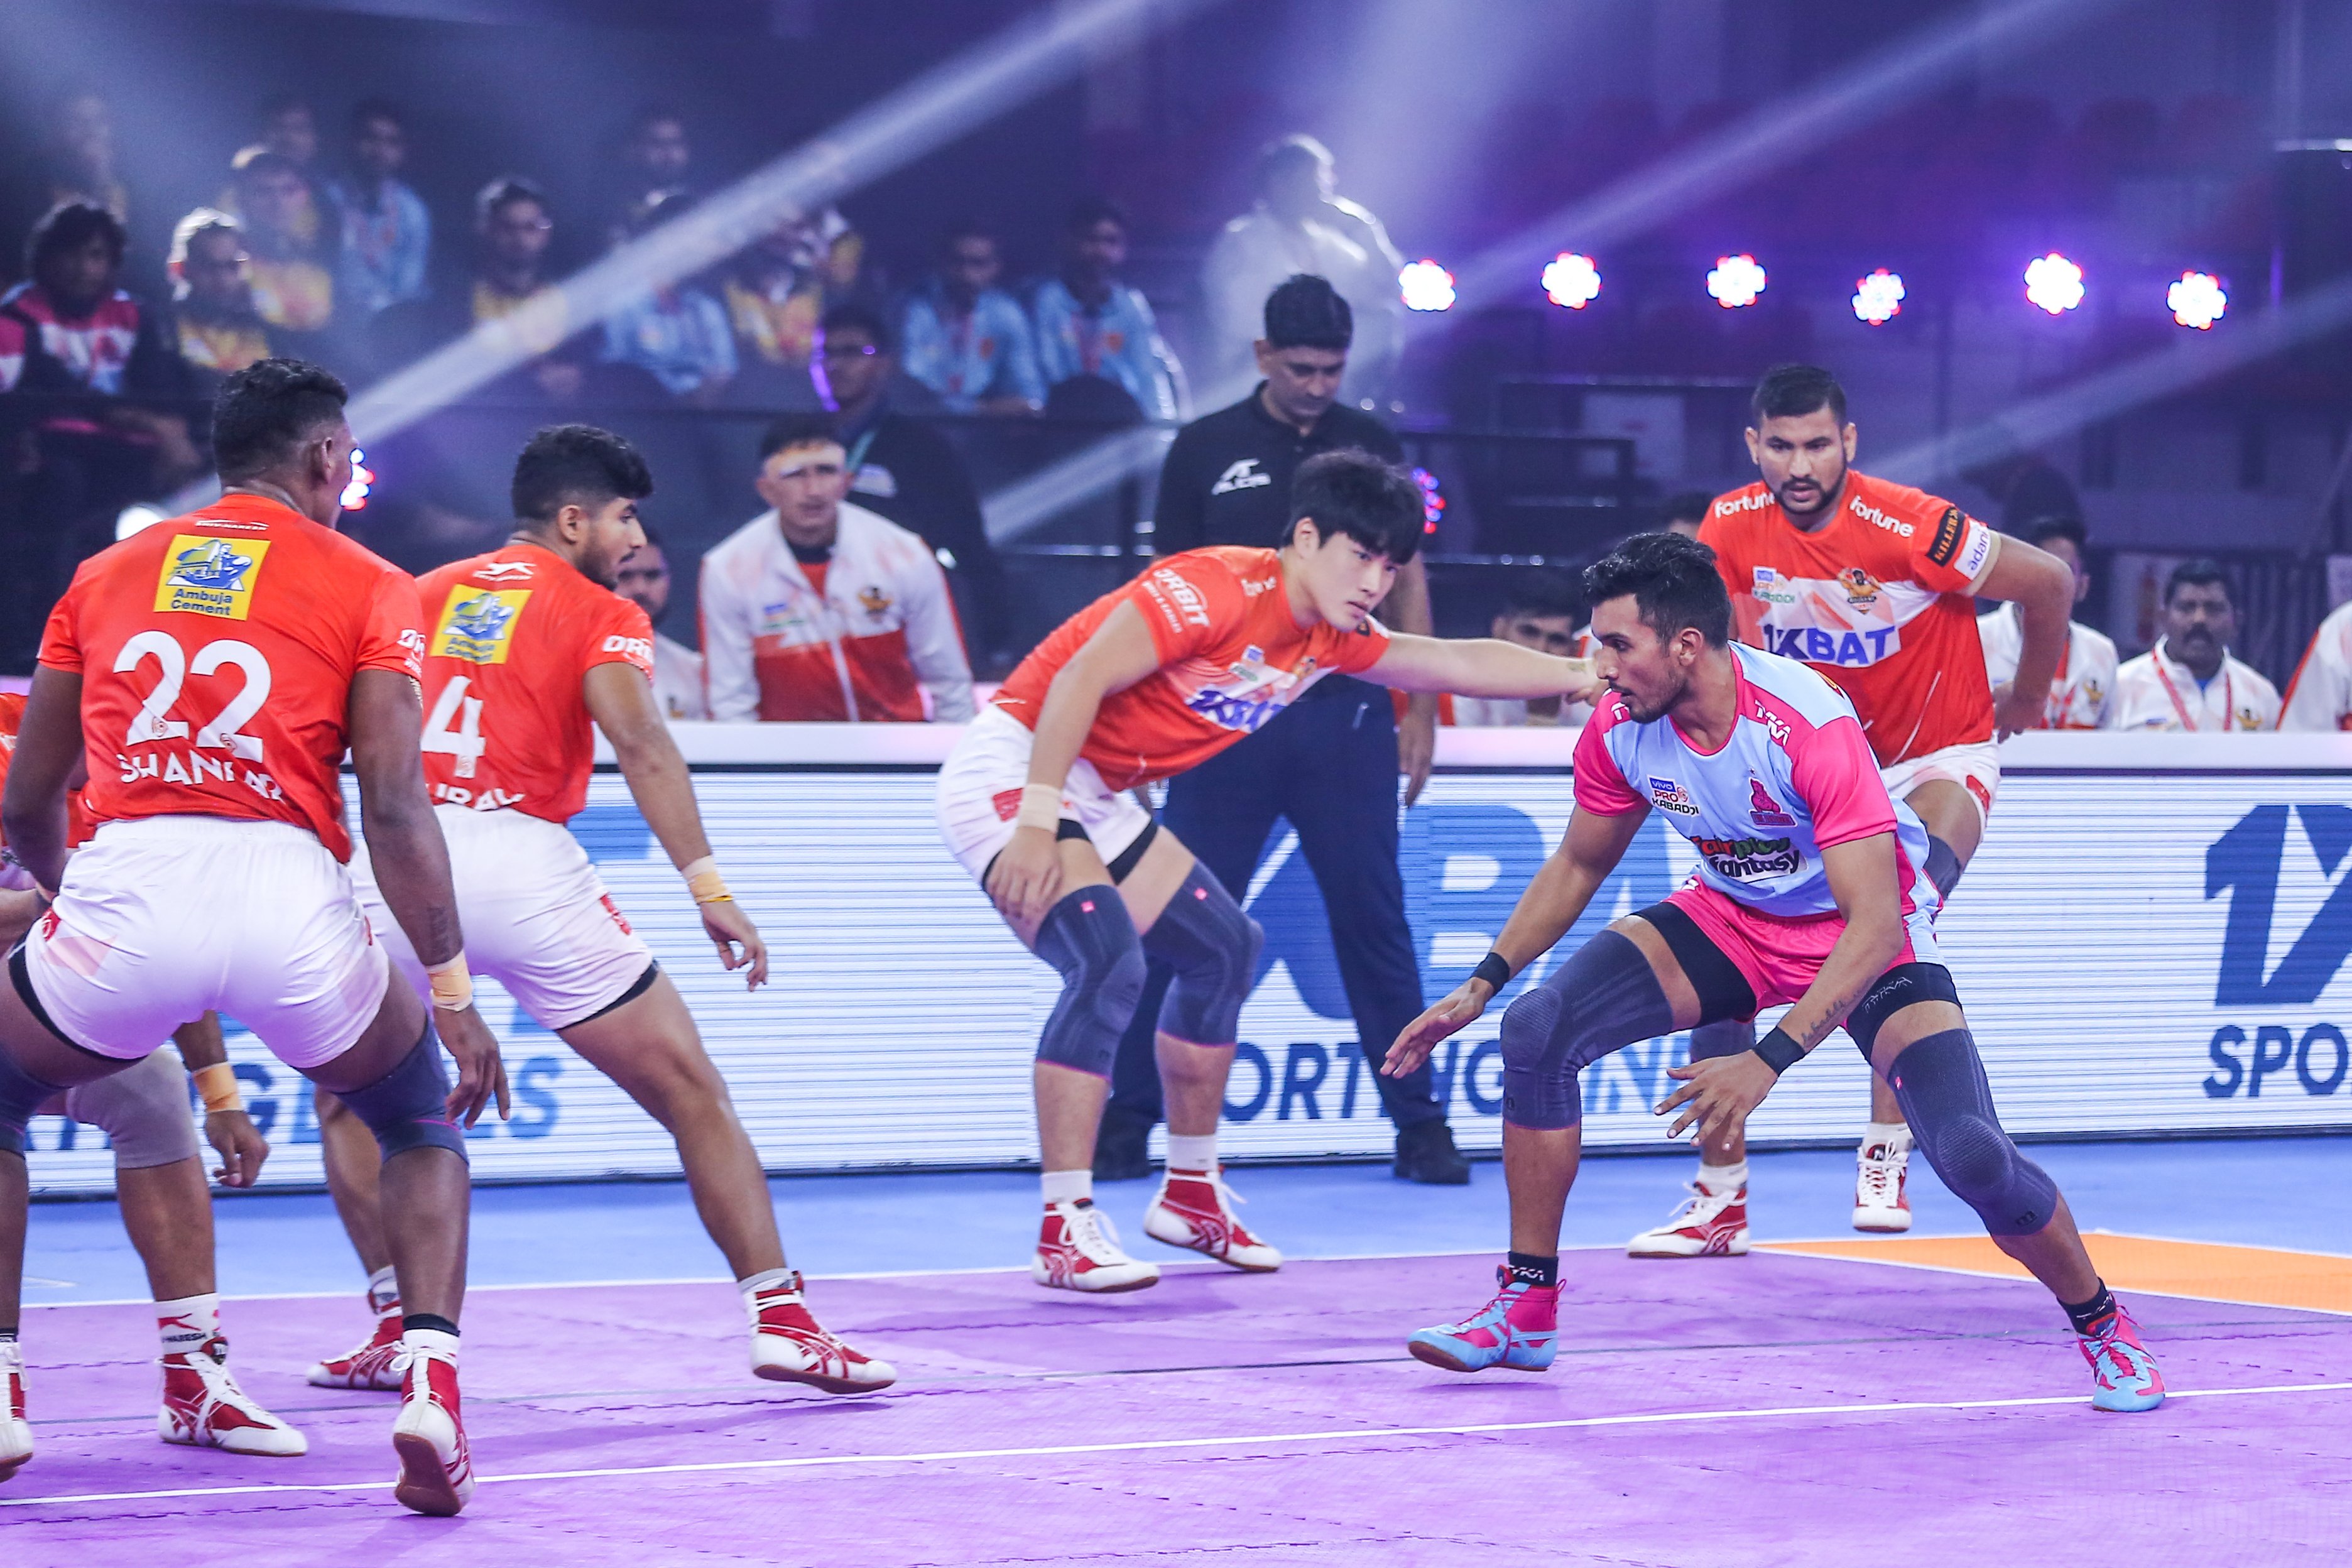 PKL 2022 LIVE: High-flying Jaipur Pink Panthers take on Bengal Warriors in blockbuster clash on Day 11 while Telugu Titans, Puneri Paltan aim for second win in Pro Kabaddi League 9 - Follow LIVE updates